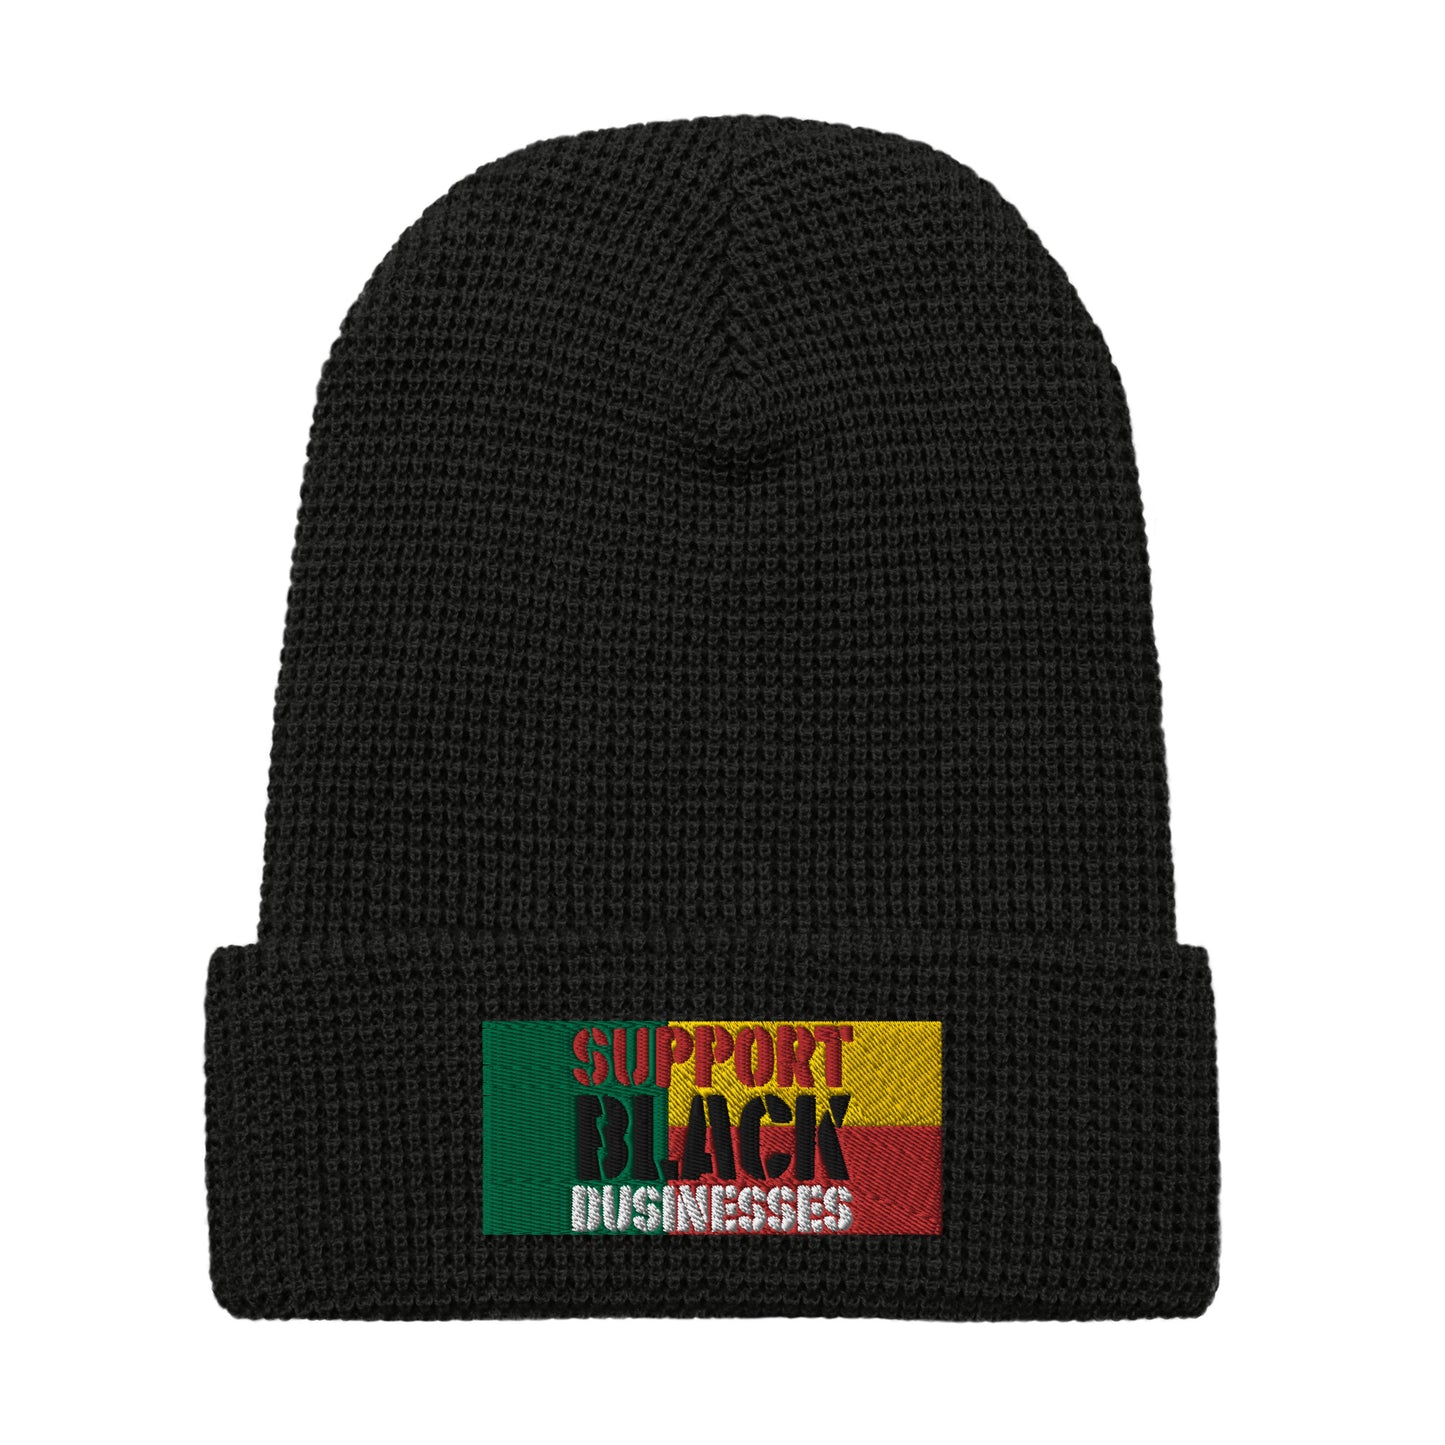 Support BLK businesses Waffle beanie by Teammate Apparel